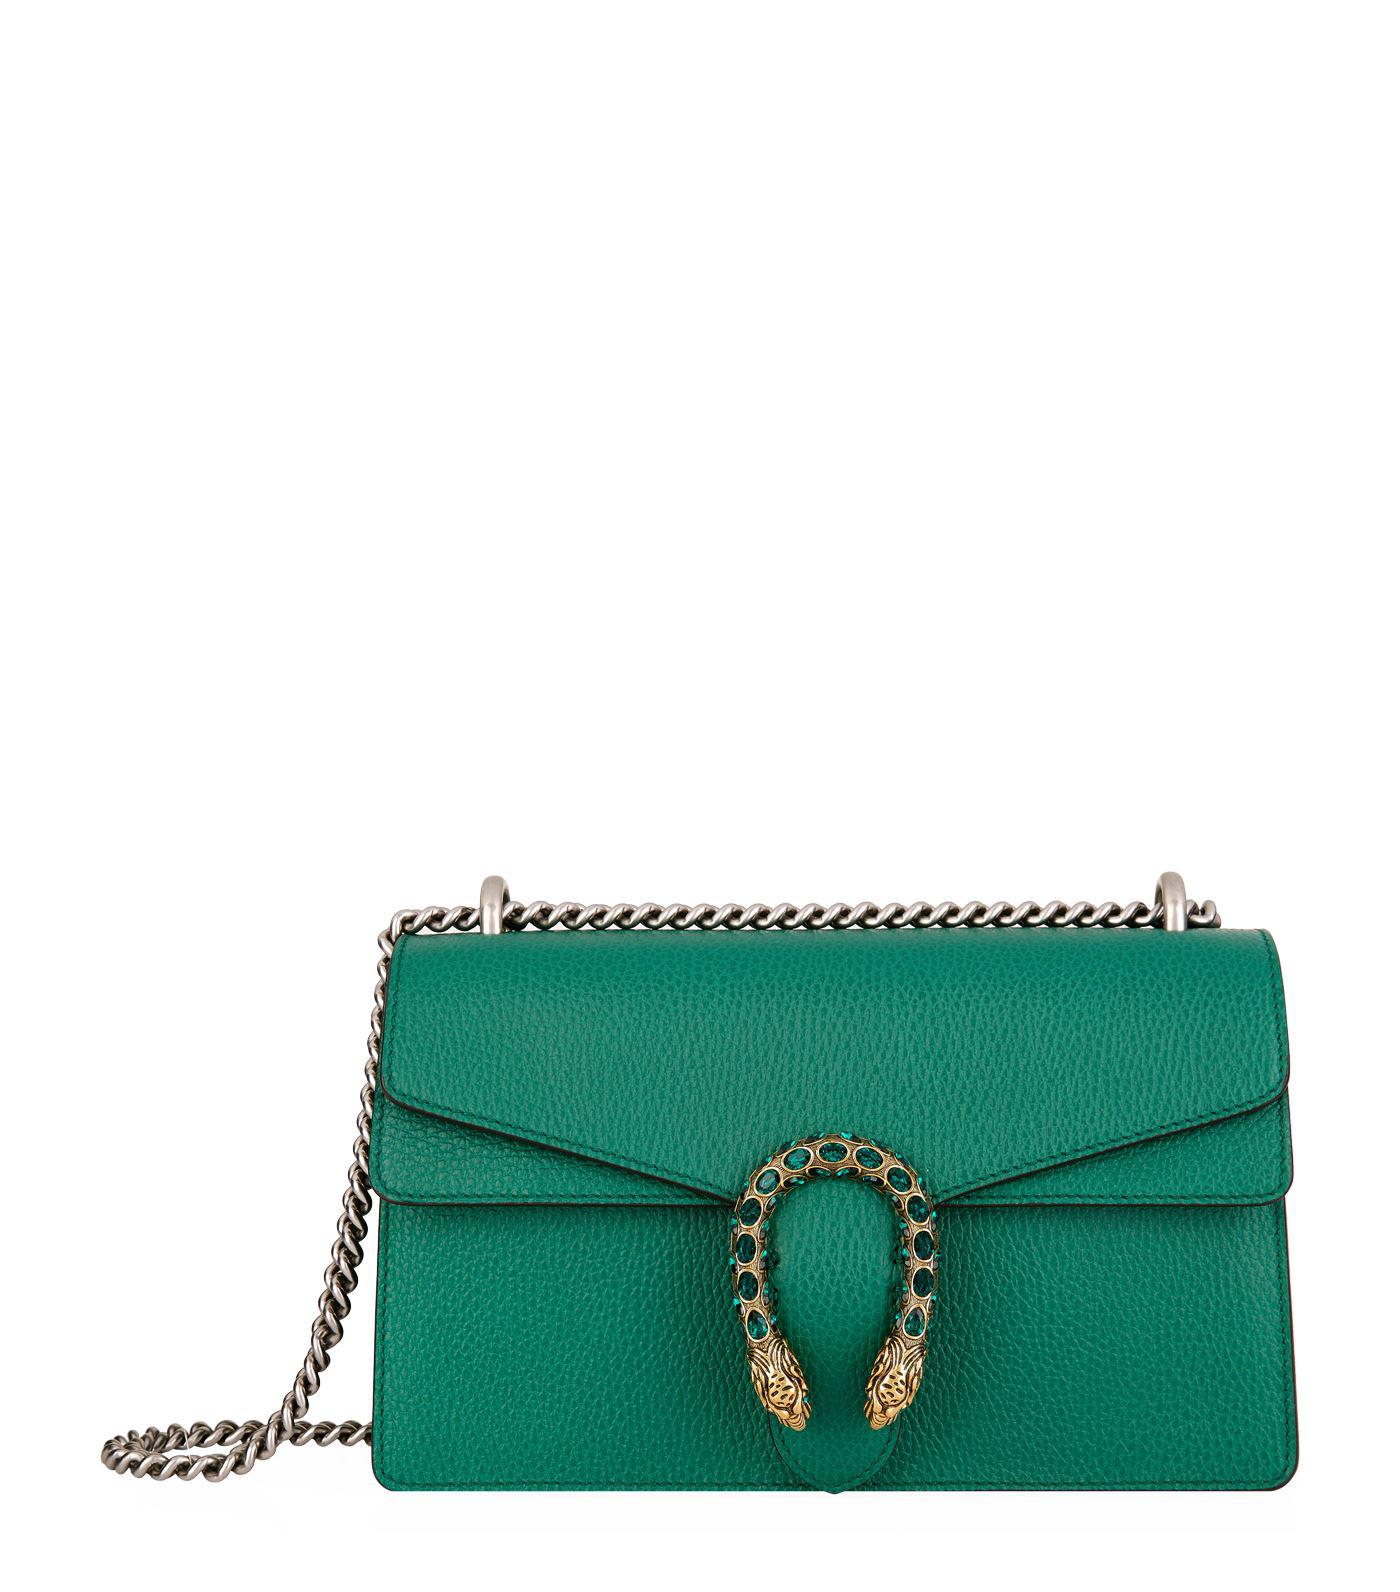 Lyst - Gucci Small Leather Dionysus Shoulder Bag in Green